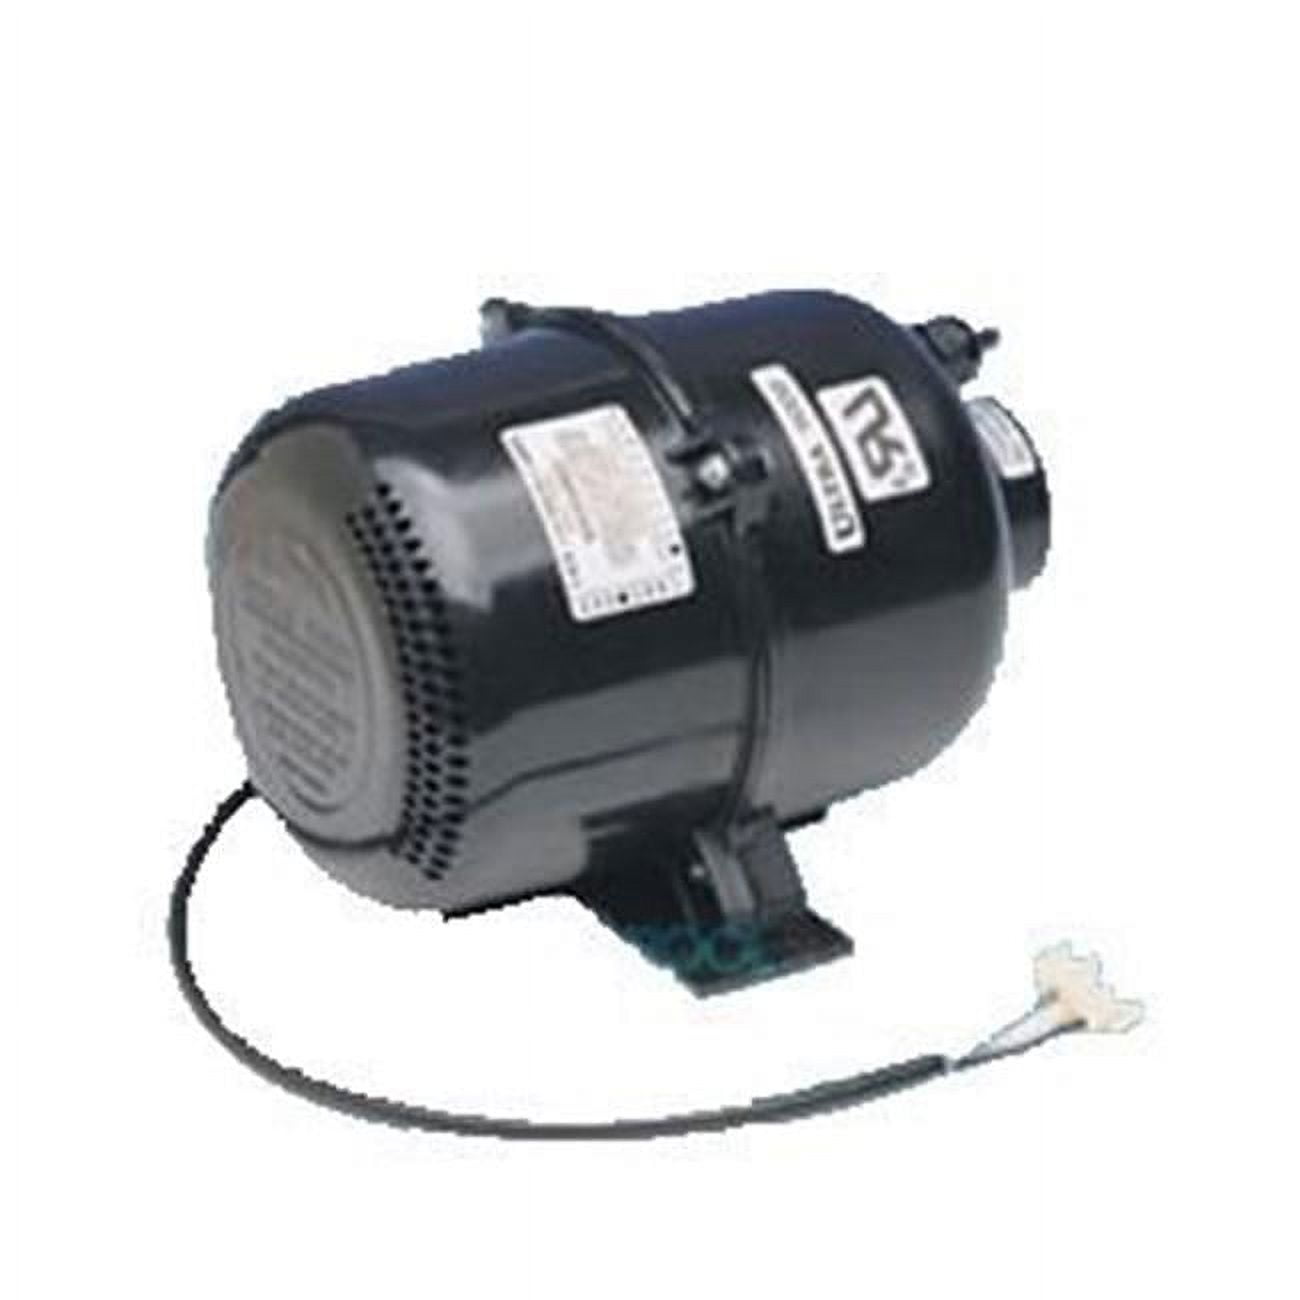 Picture of Air Supply 3915231 1.5HP 240V 3.5A Ultra 9000 Blower Motor